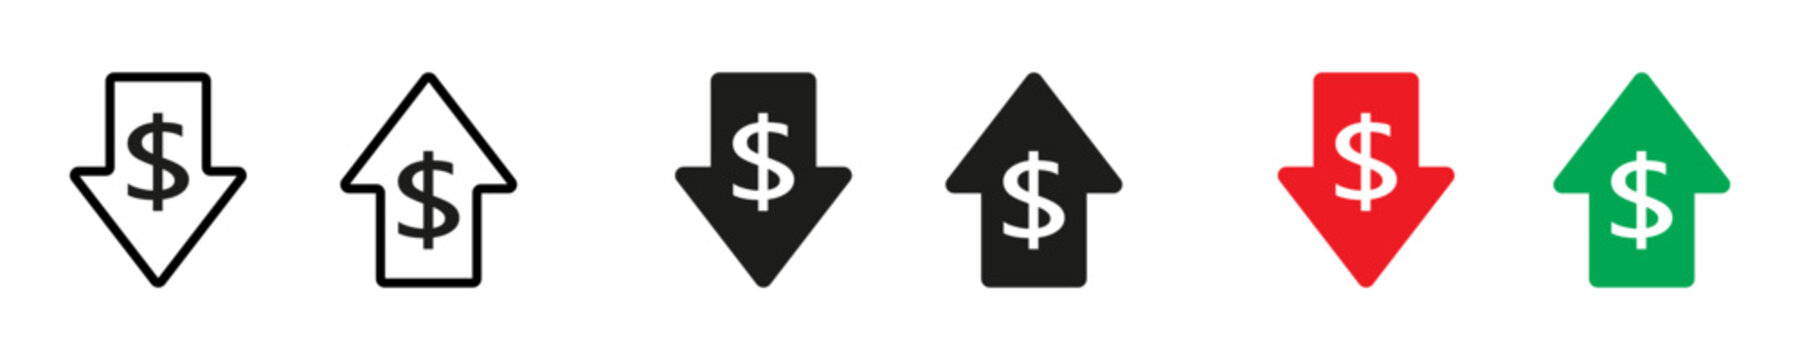 Increase, decrease dollar vector icons.  Losing money. Sign rise and fall of the dollar vector desing. EPS 10